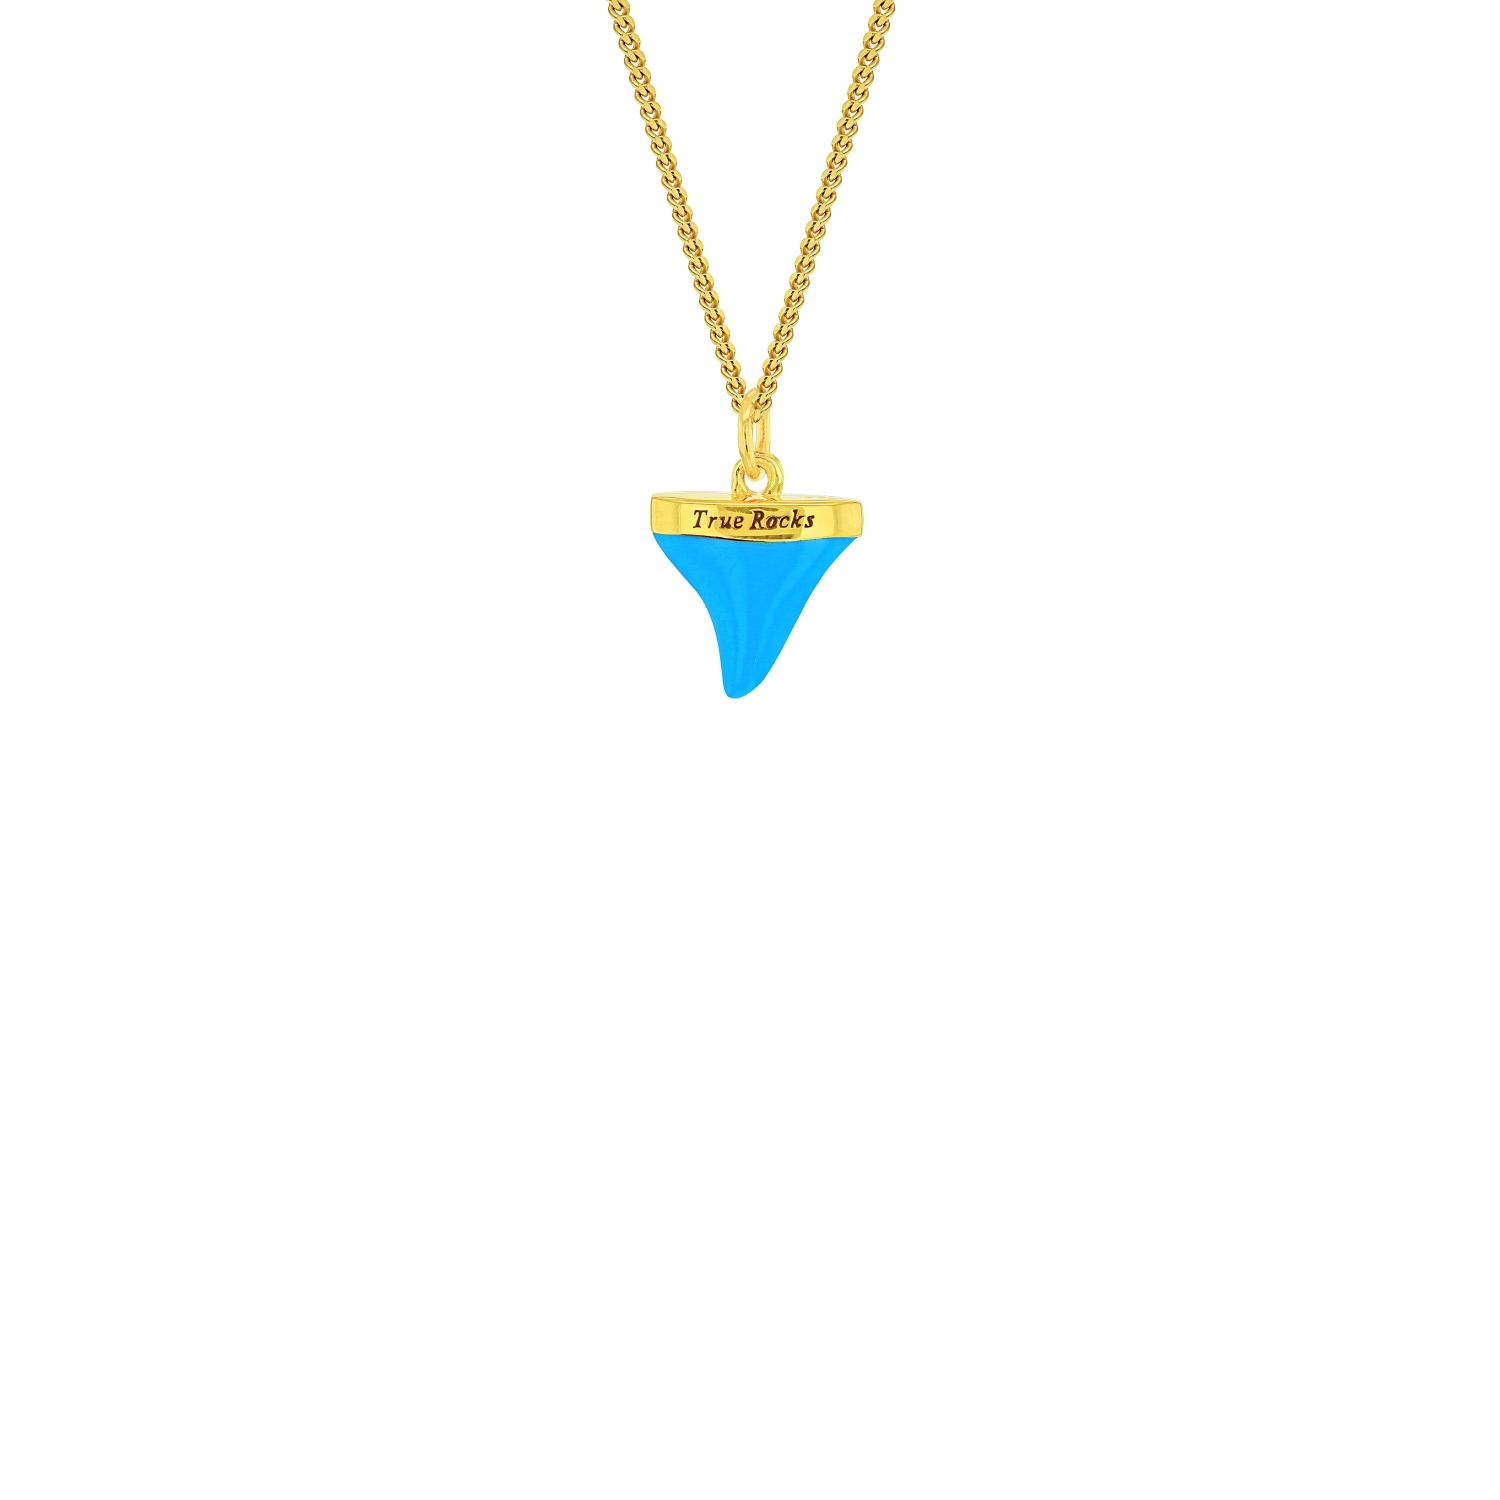 Men's Blue / Gold 18Kt Gold Plated & Turquoise Mini Sharks Tooth Pendant True Rocks